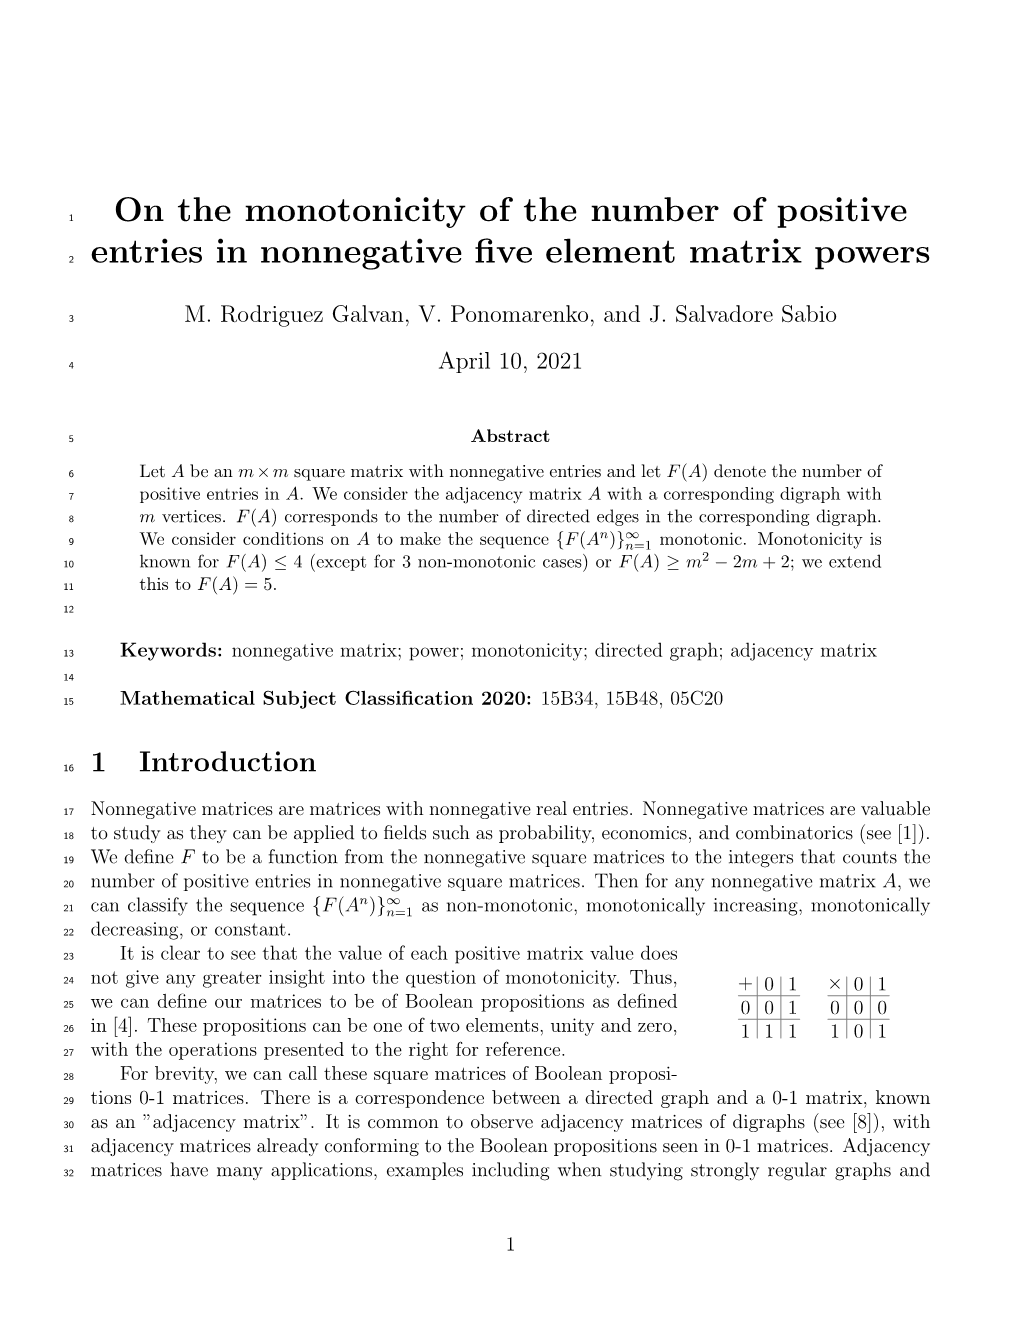 On the Monotonicity of the Number of Positive